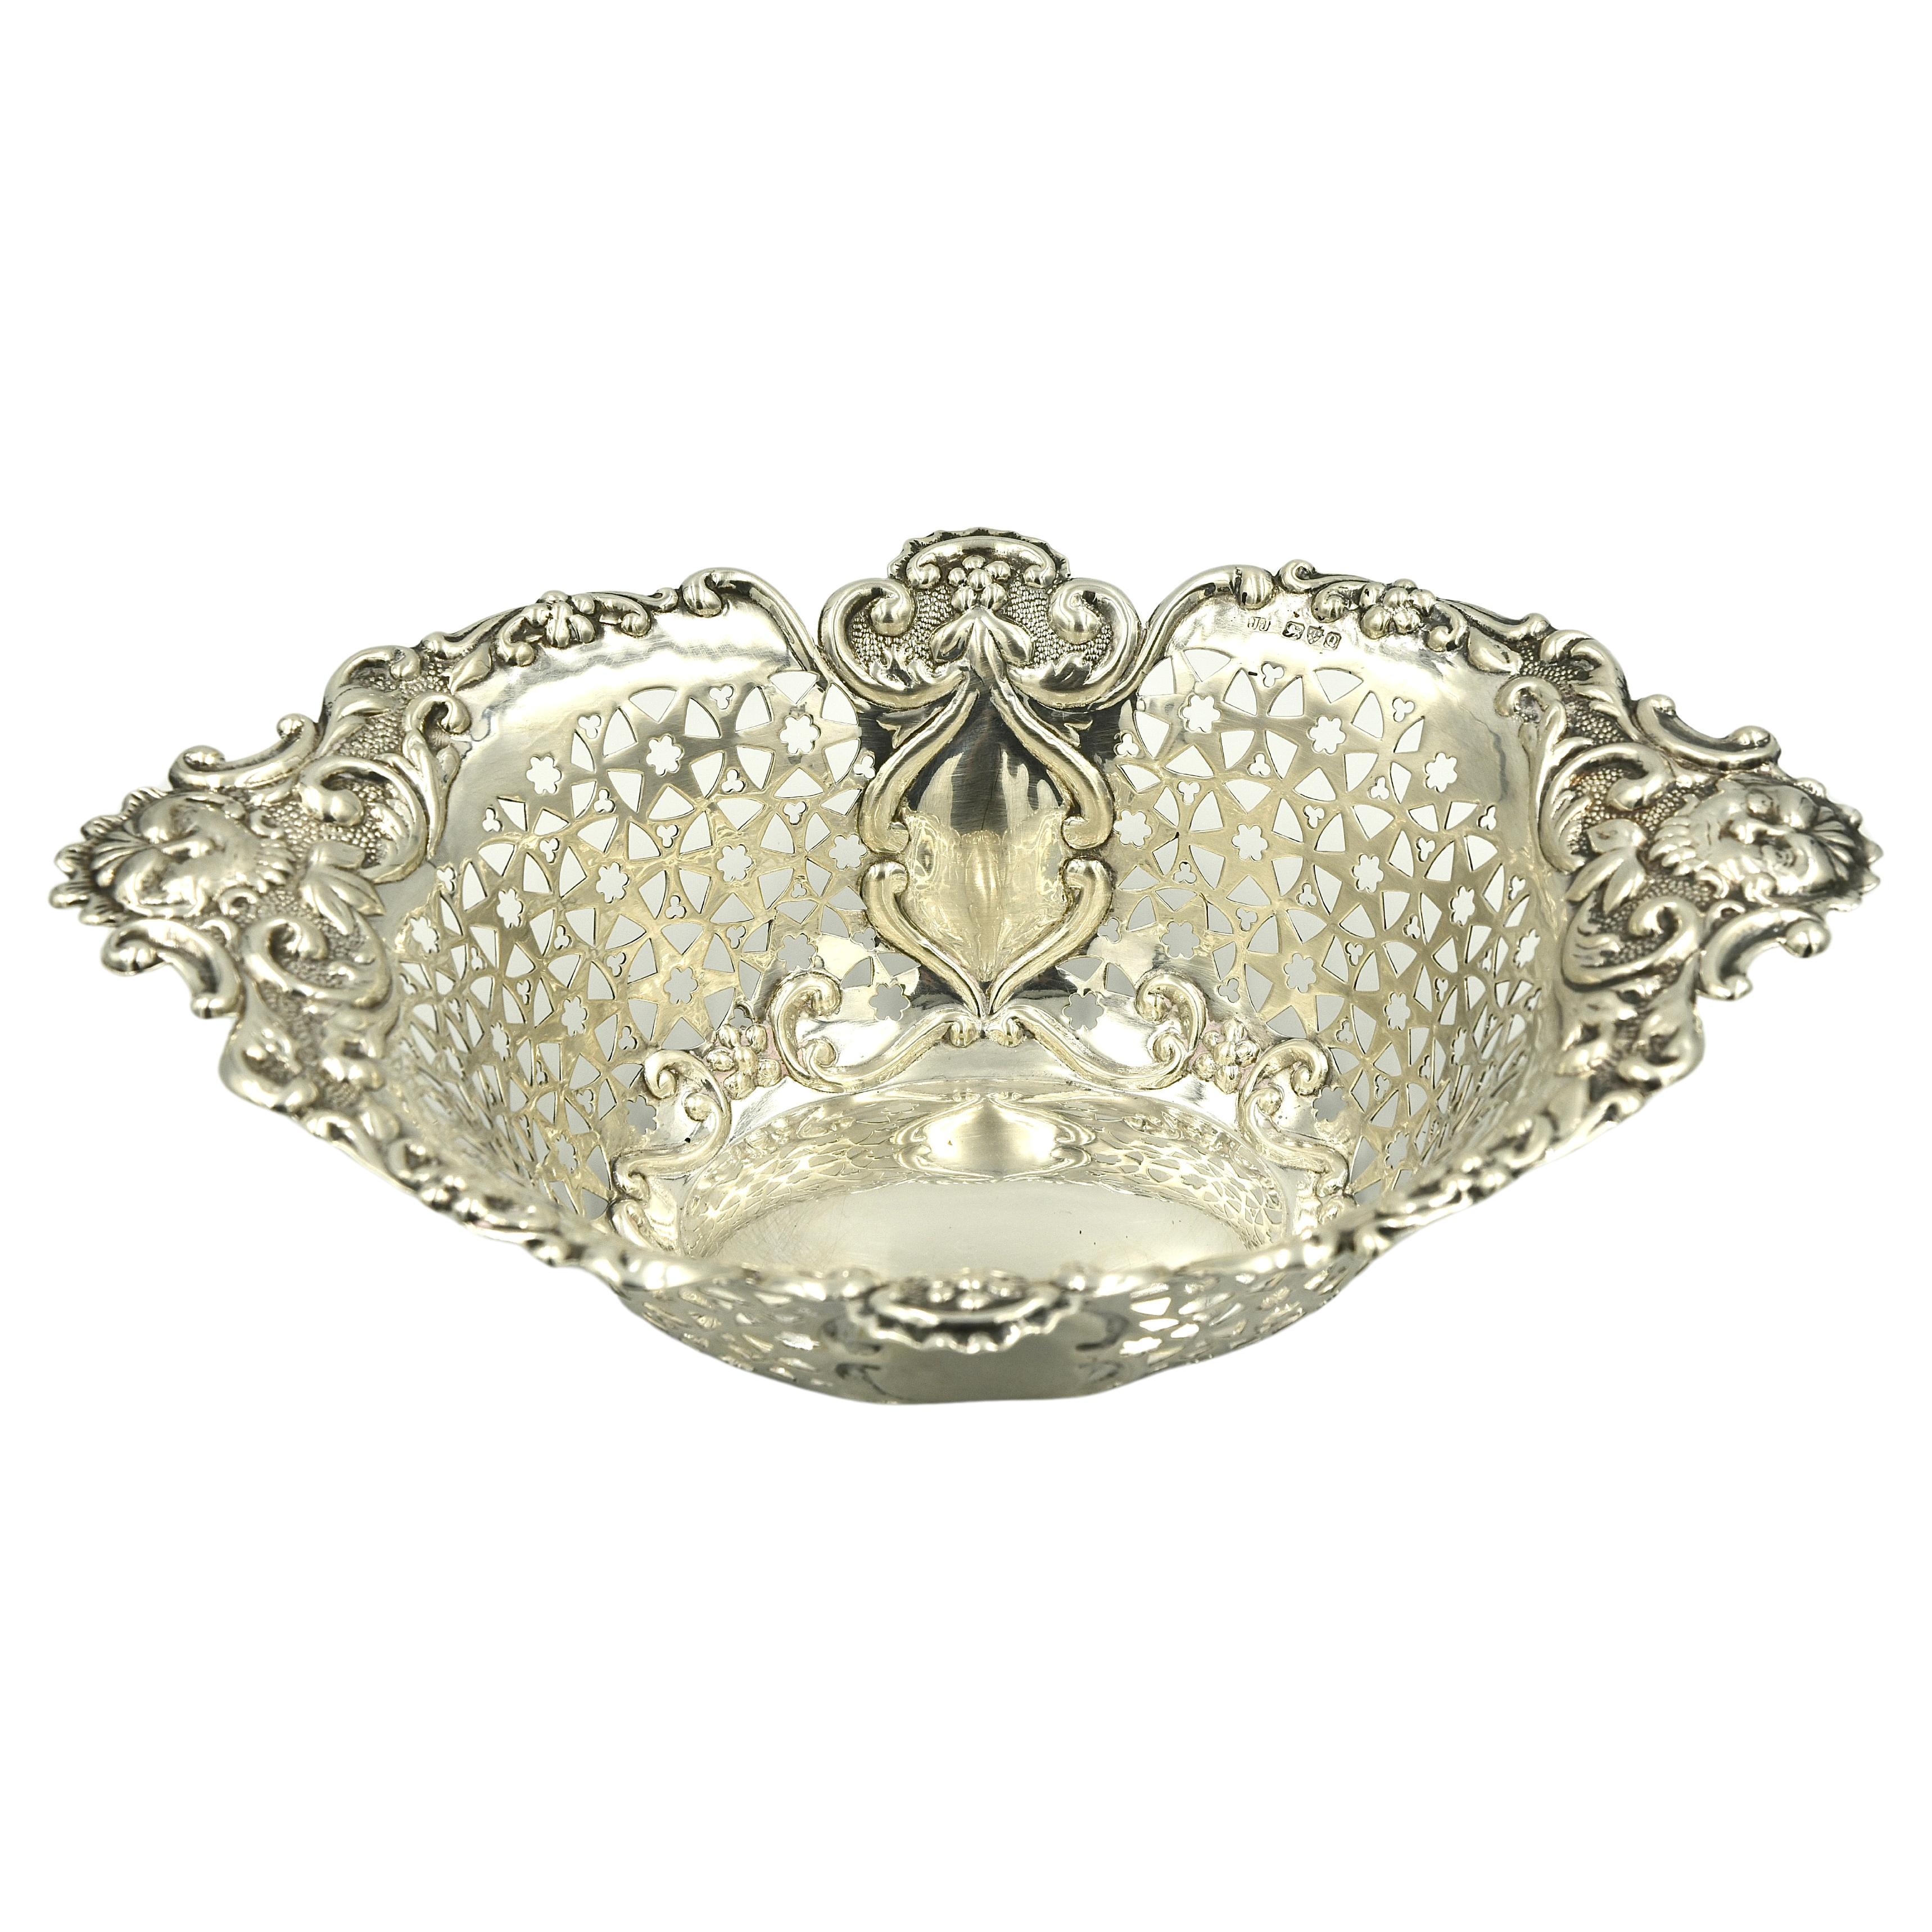 19th Century English Sterling silver fruit basket by James Charles Jay Chester 